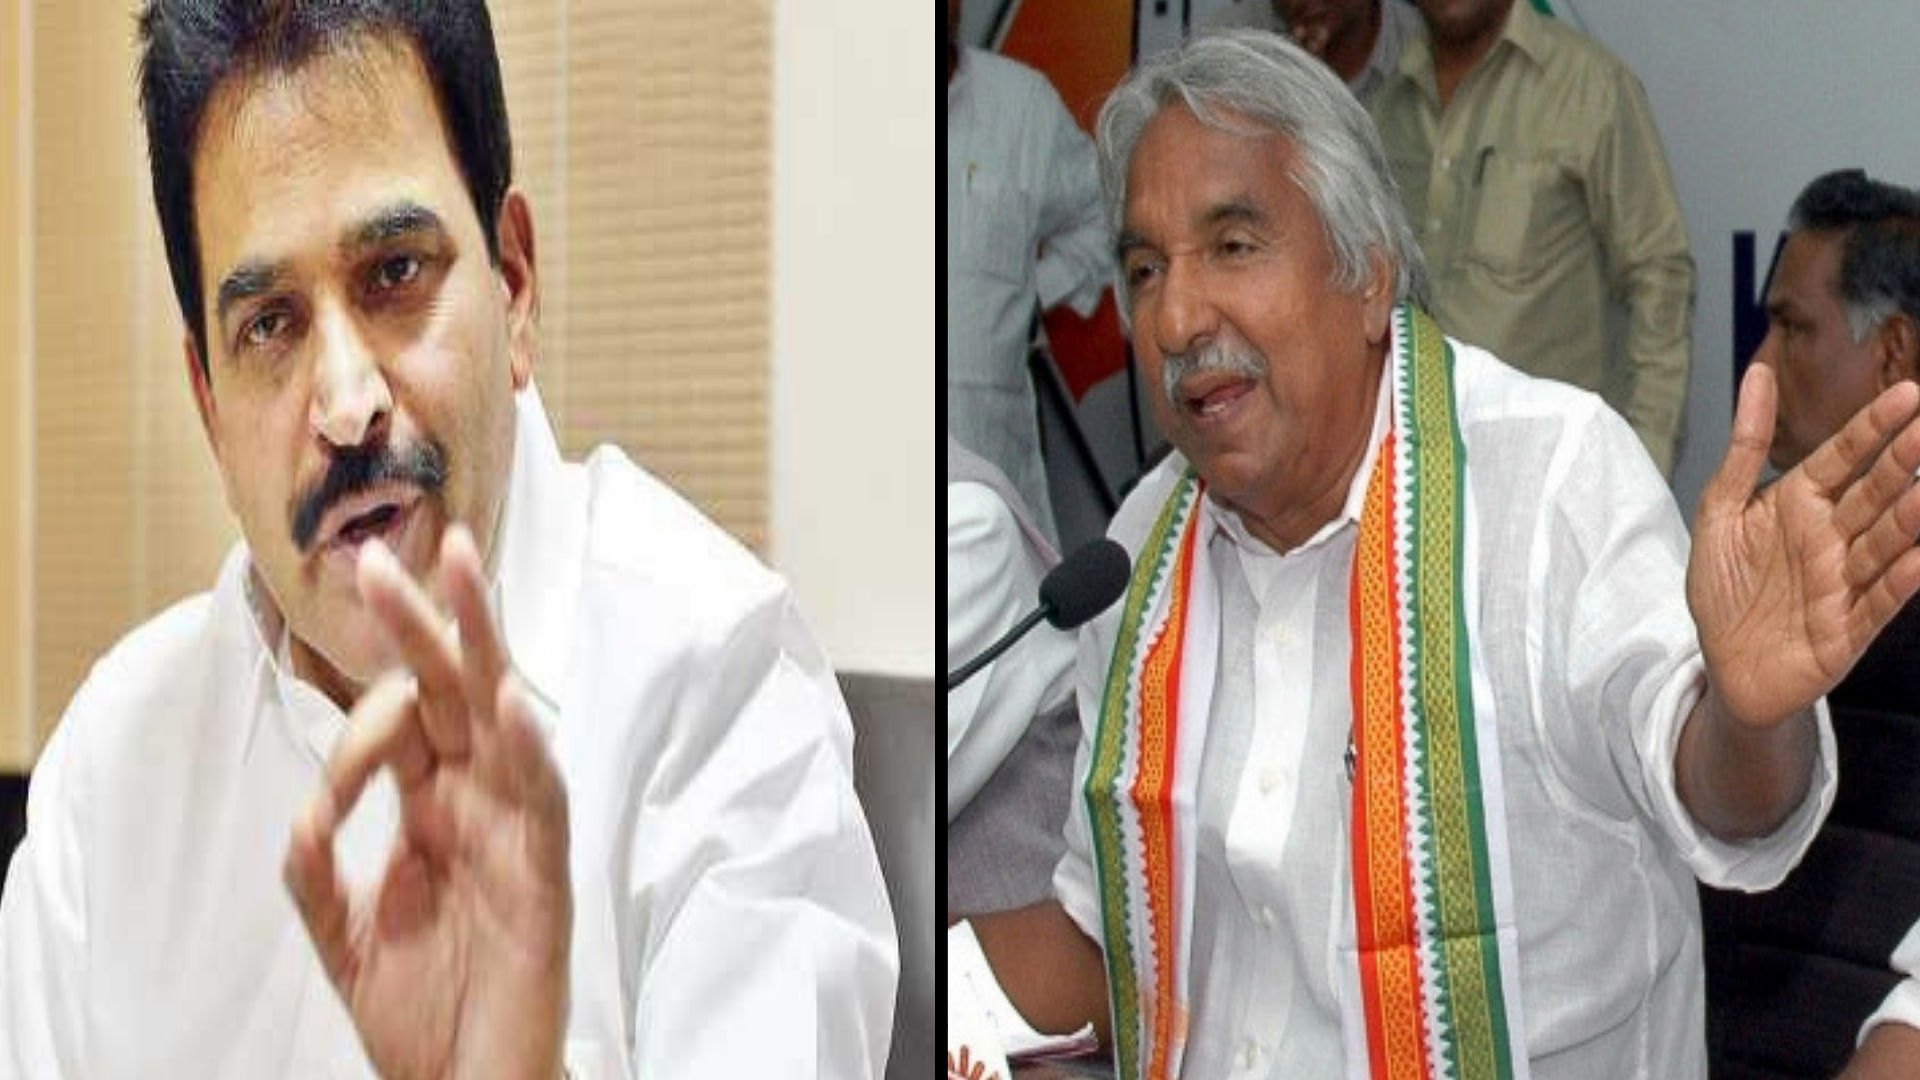 FIR filed against former Kerala CM Oommen Chandy and MP KC Venugopal for allegedly sexually assaulting Saritha Nair.